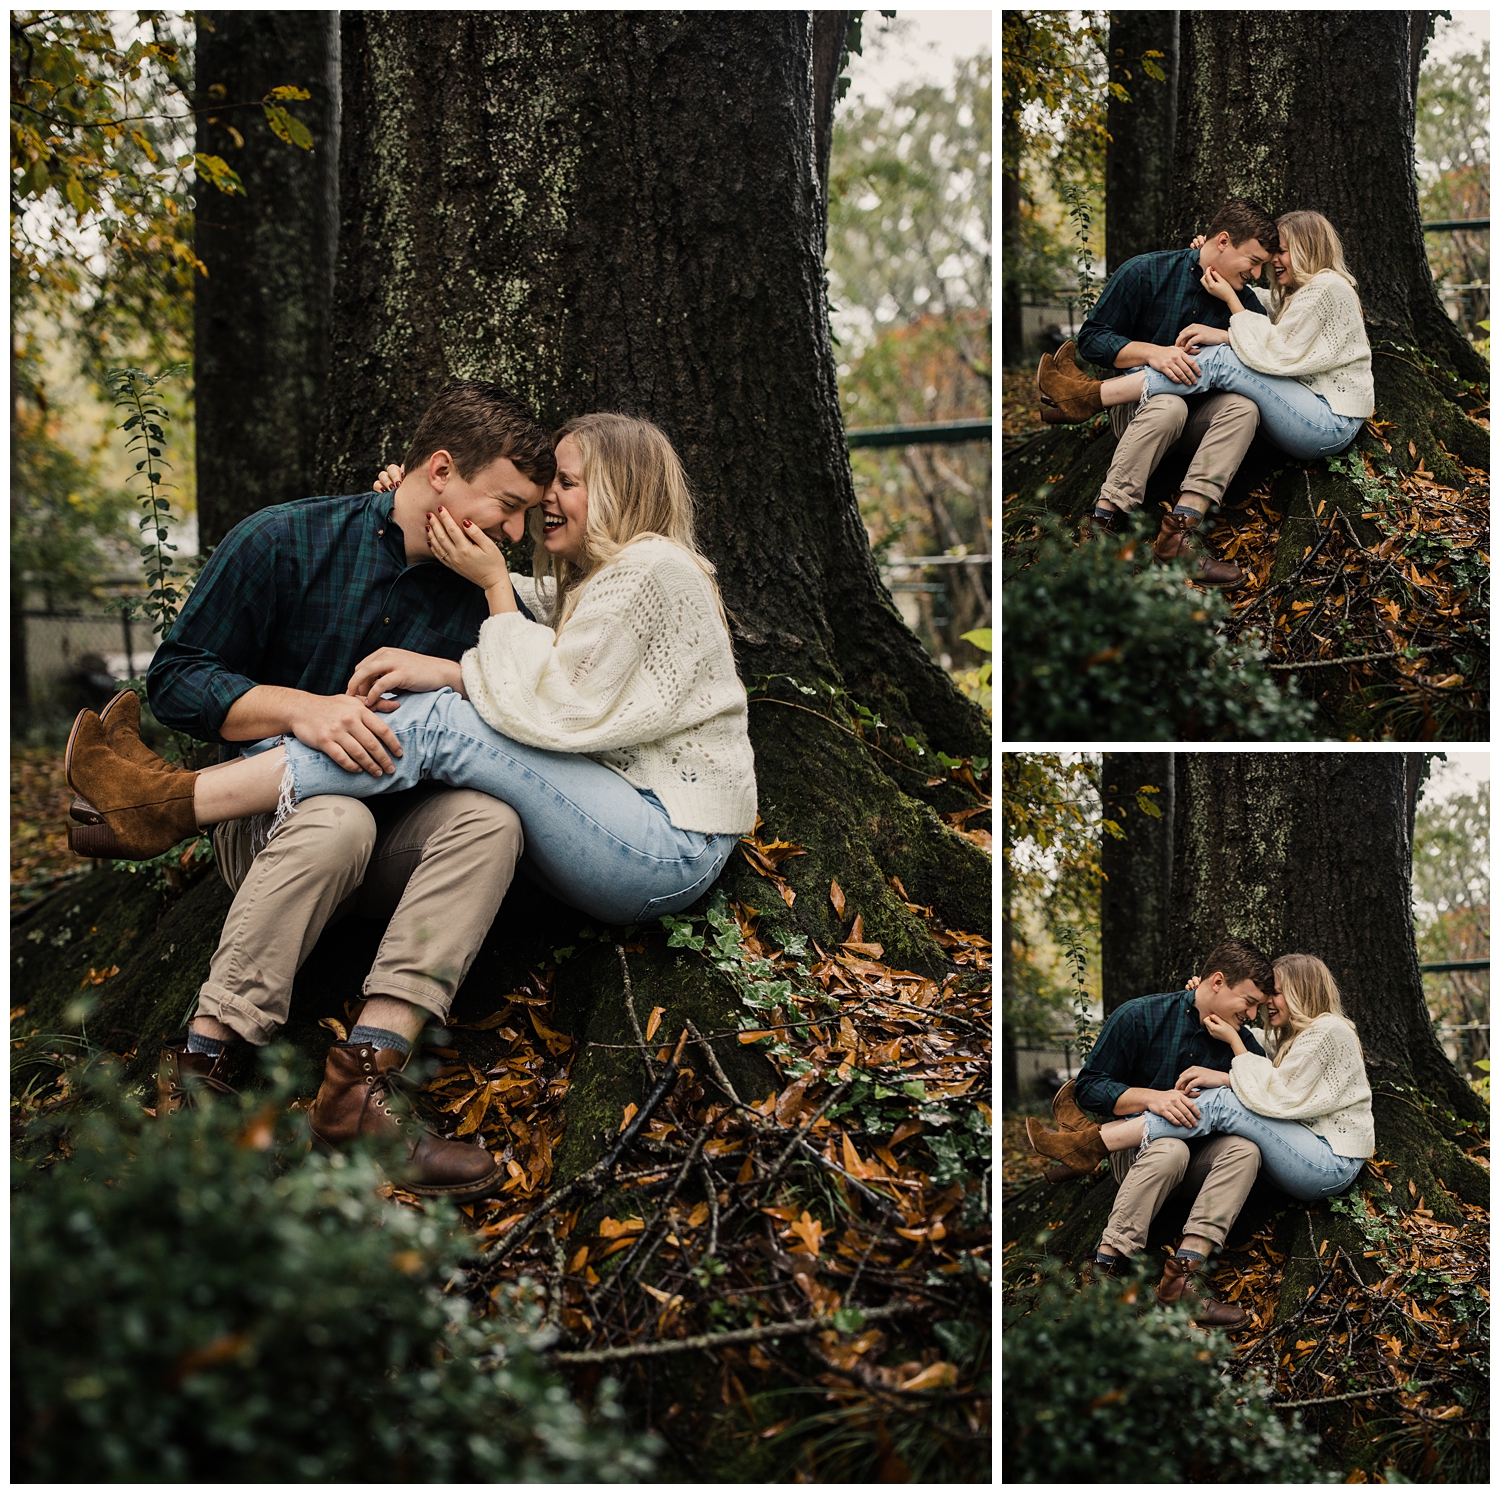 rainy day engagement session in marietta, georgia with cute couple sitting and laughing under a tree